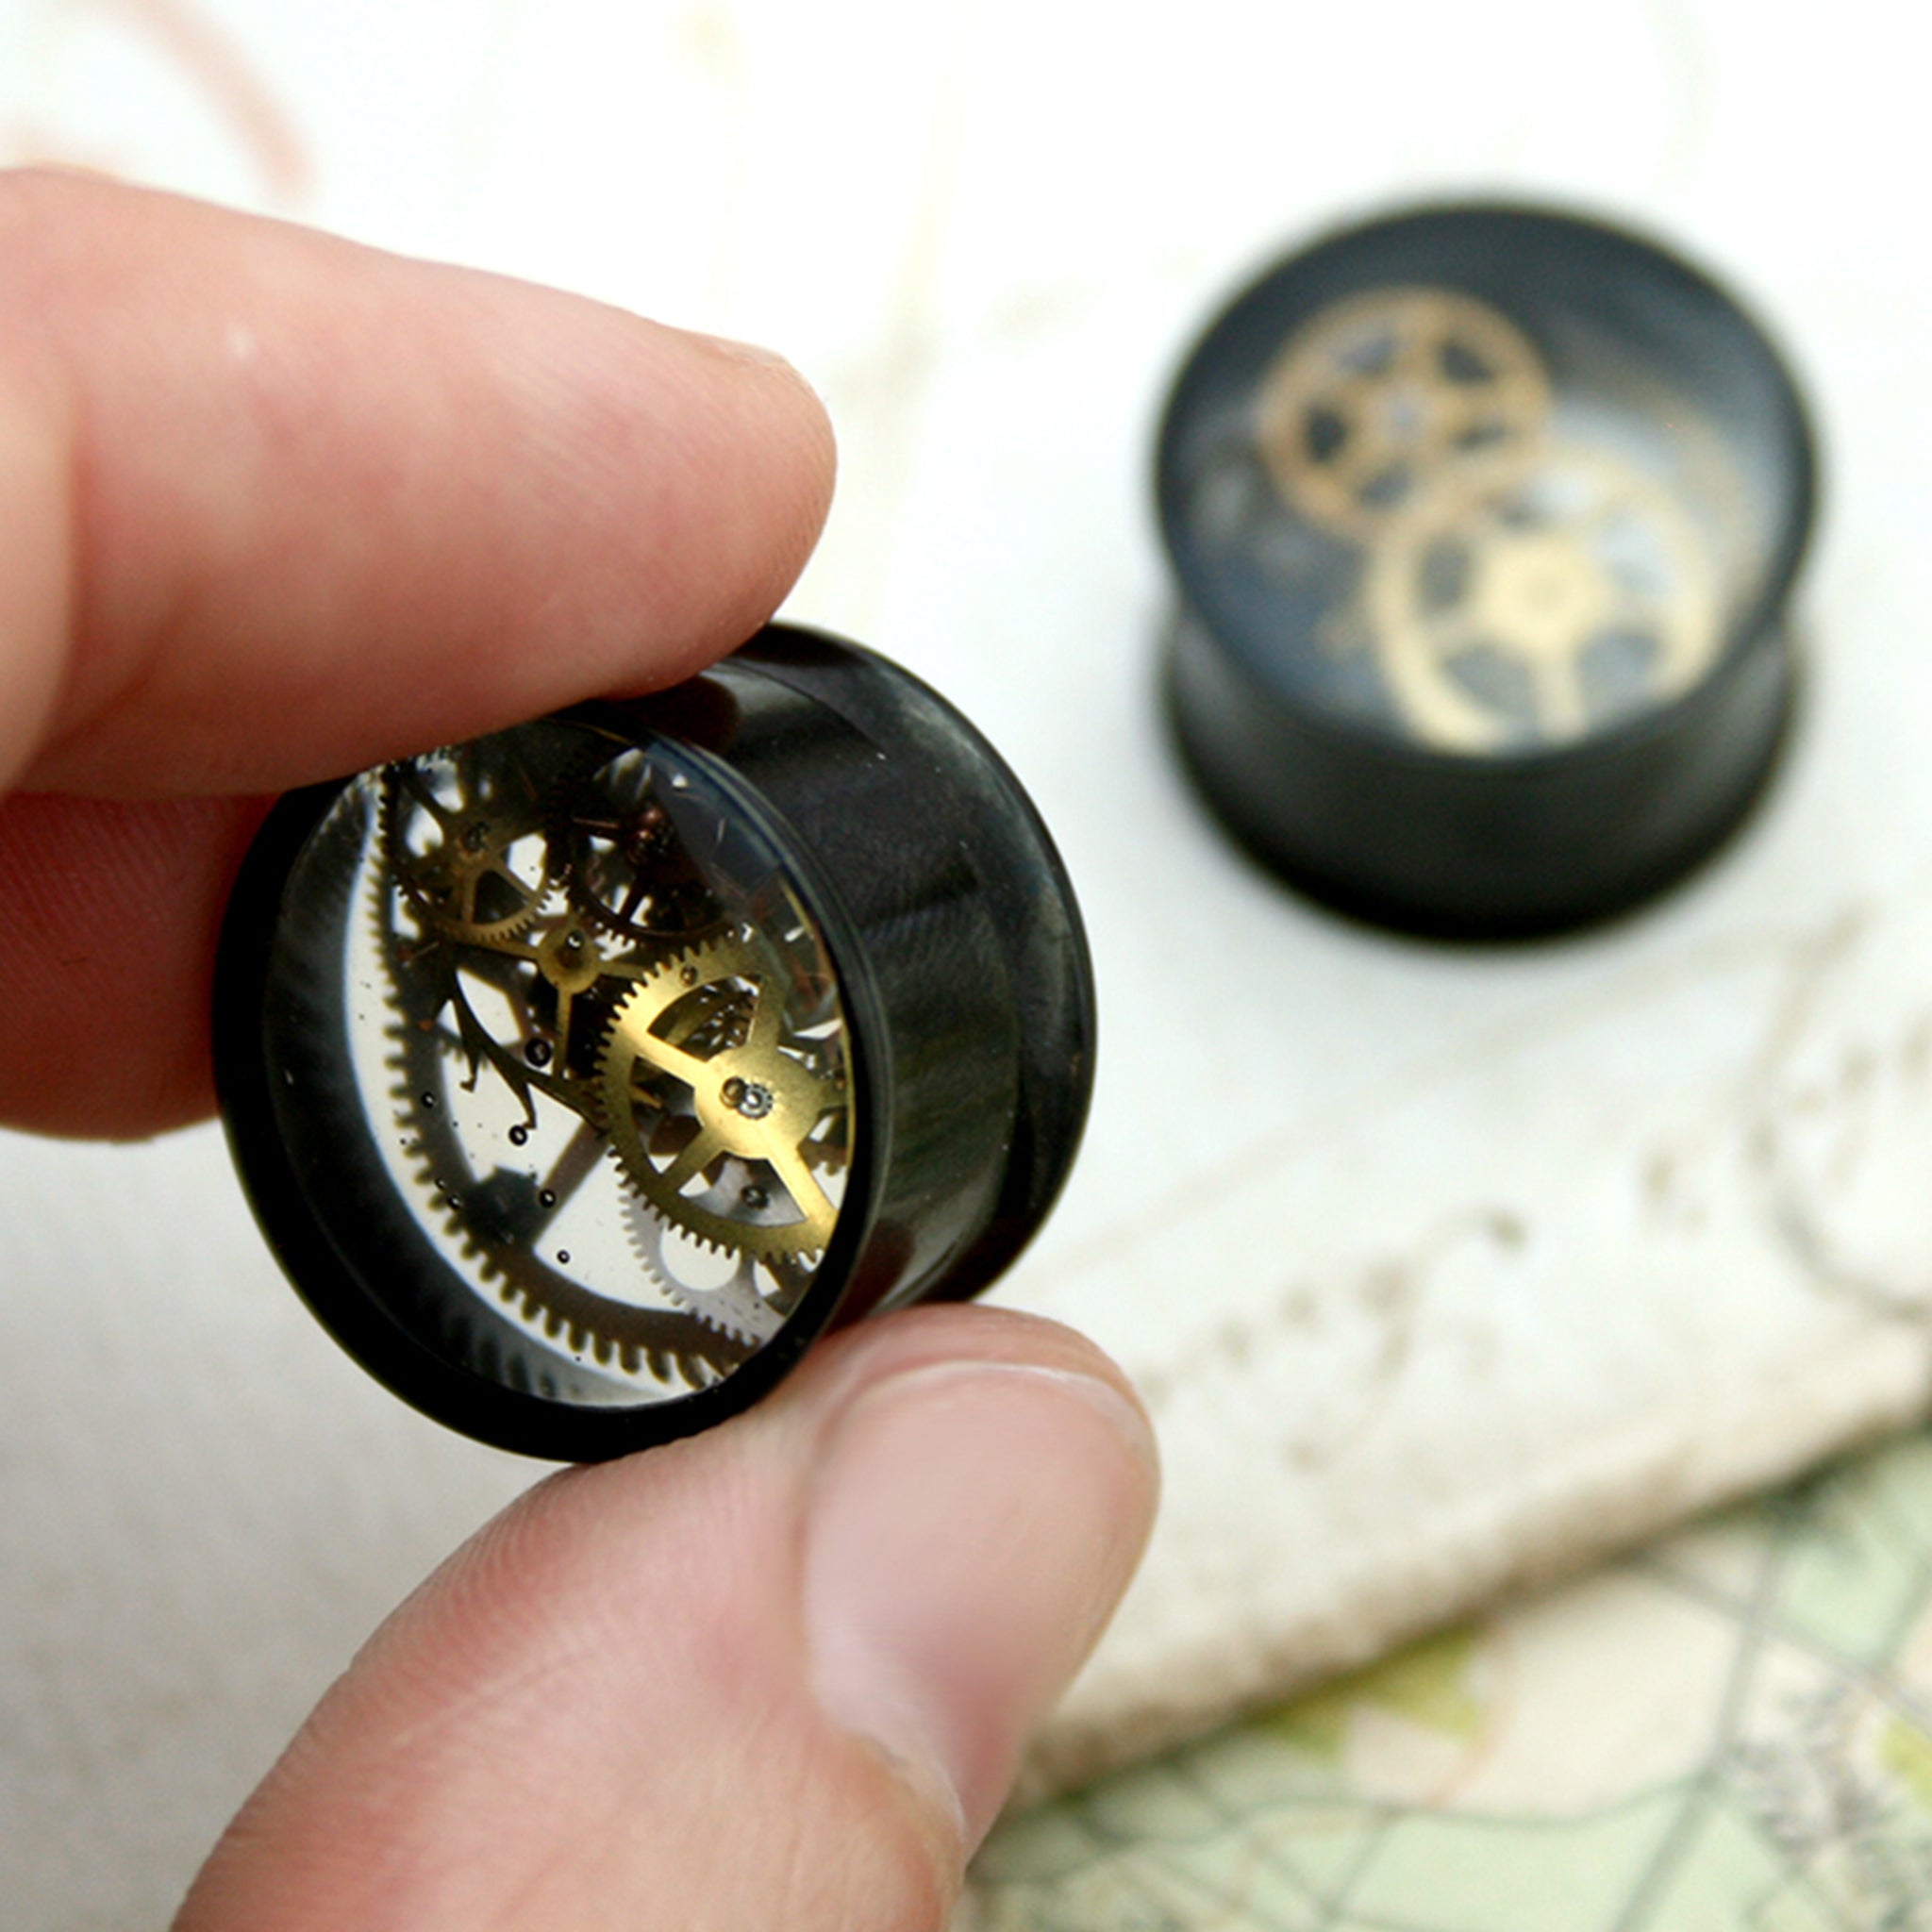 16mm ear gauges in steampunk style with silicone o-rings